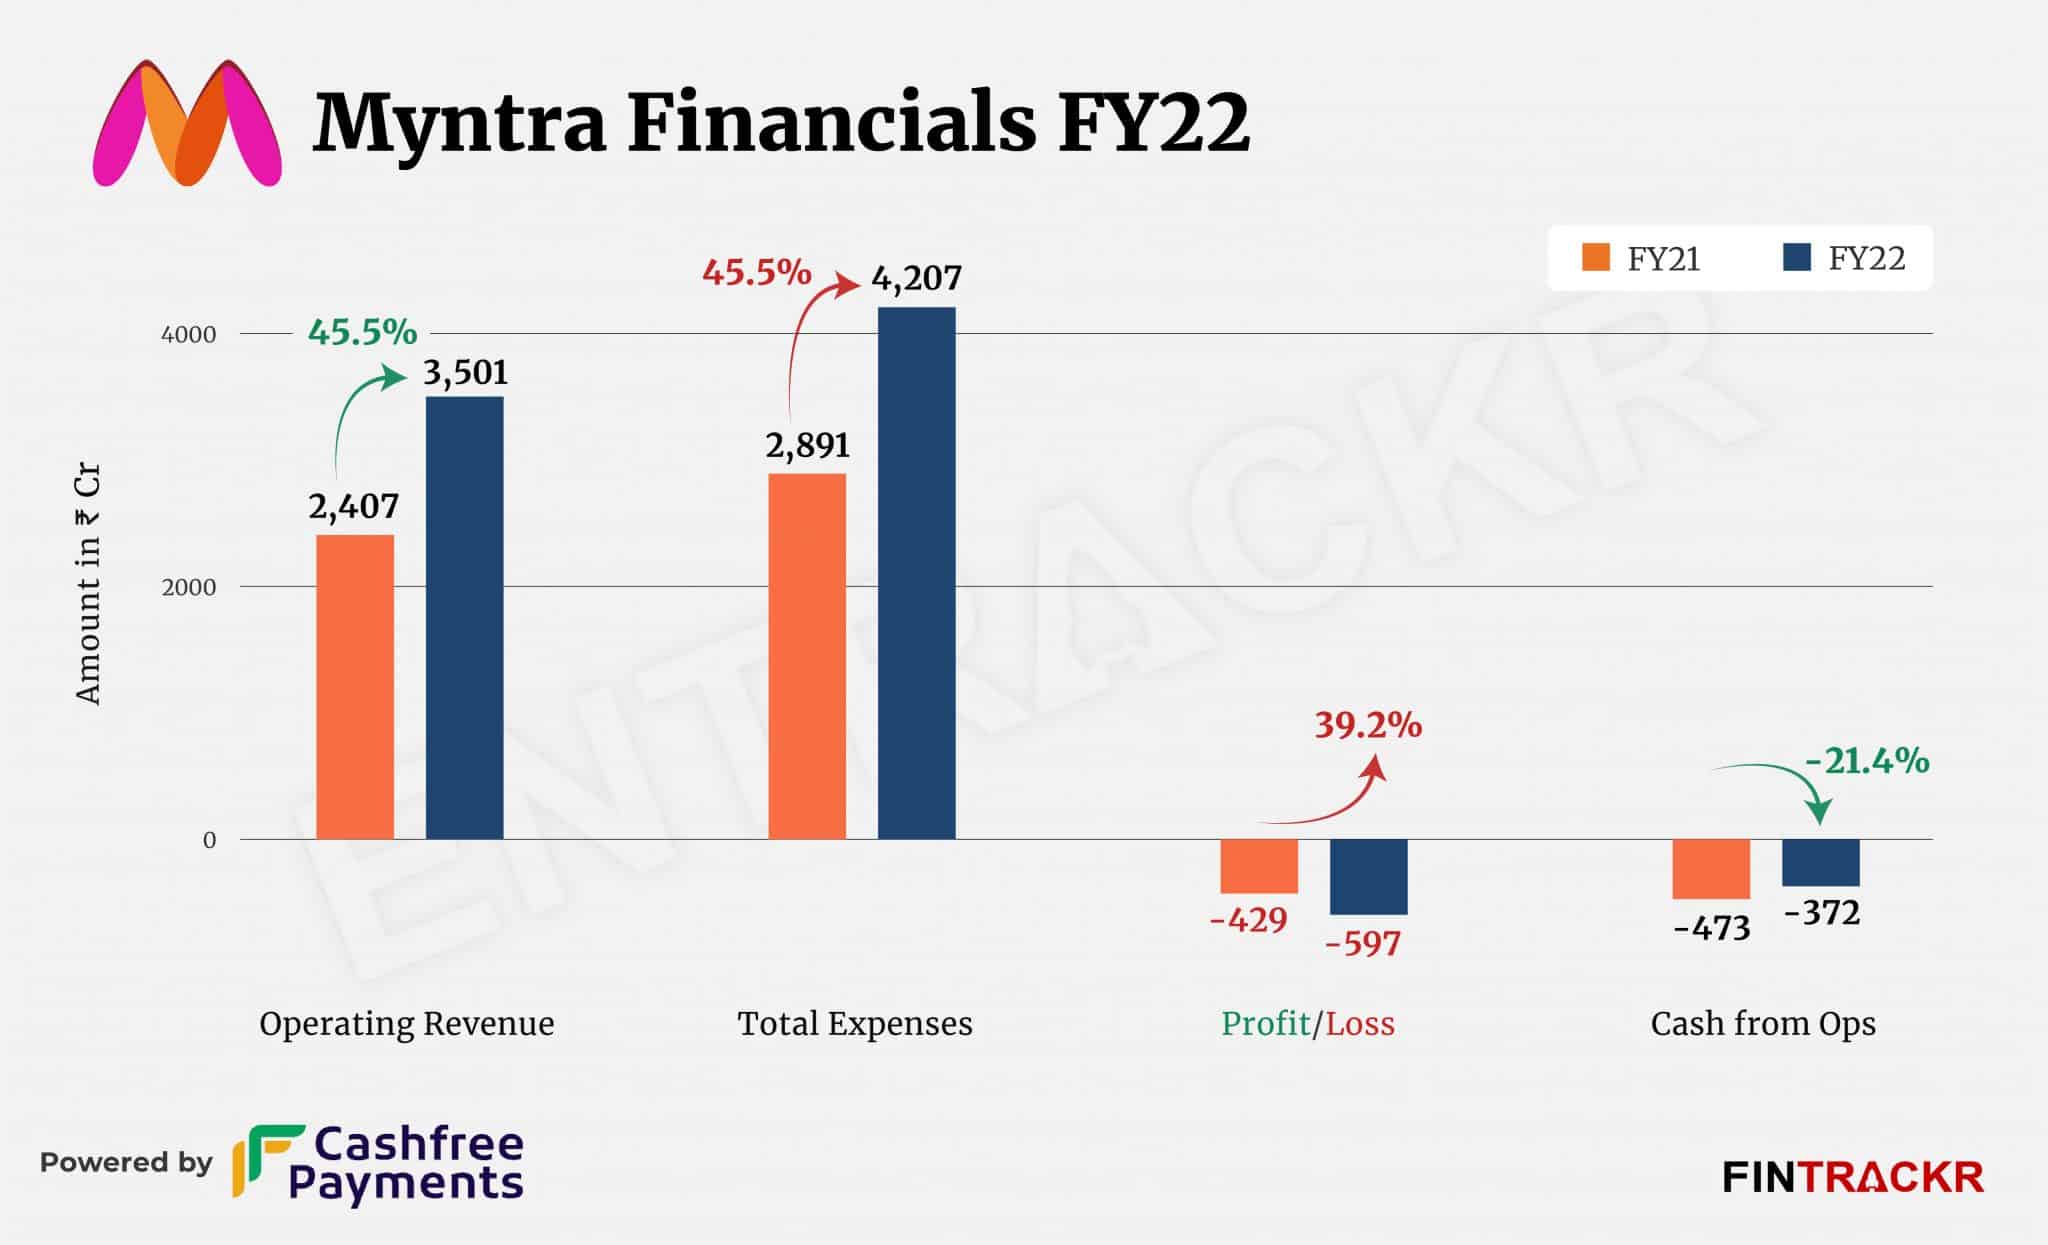 Myntra ends FY22 with Rs 3,610 Cr revenue and Rs 597 Cr loss